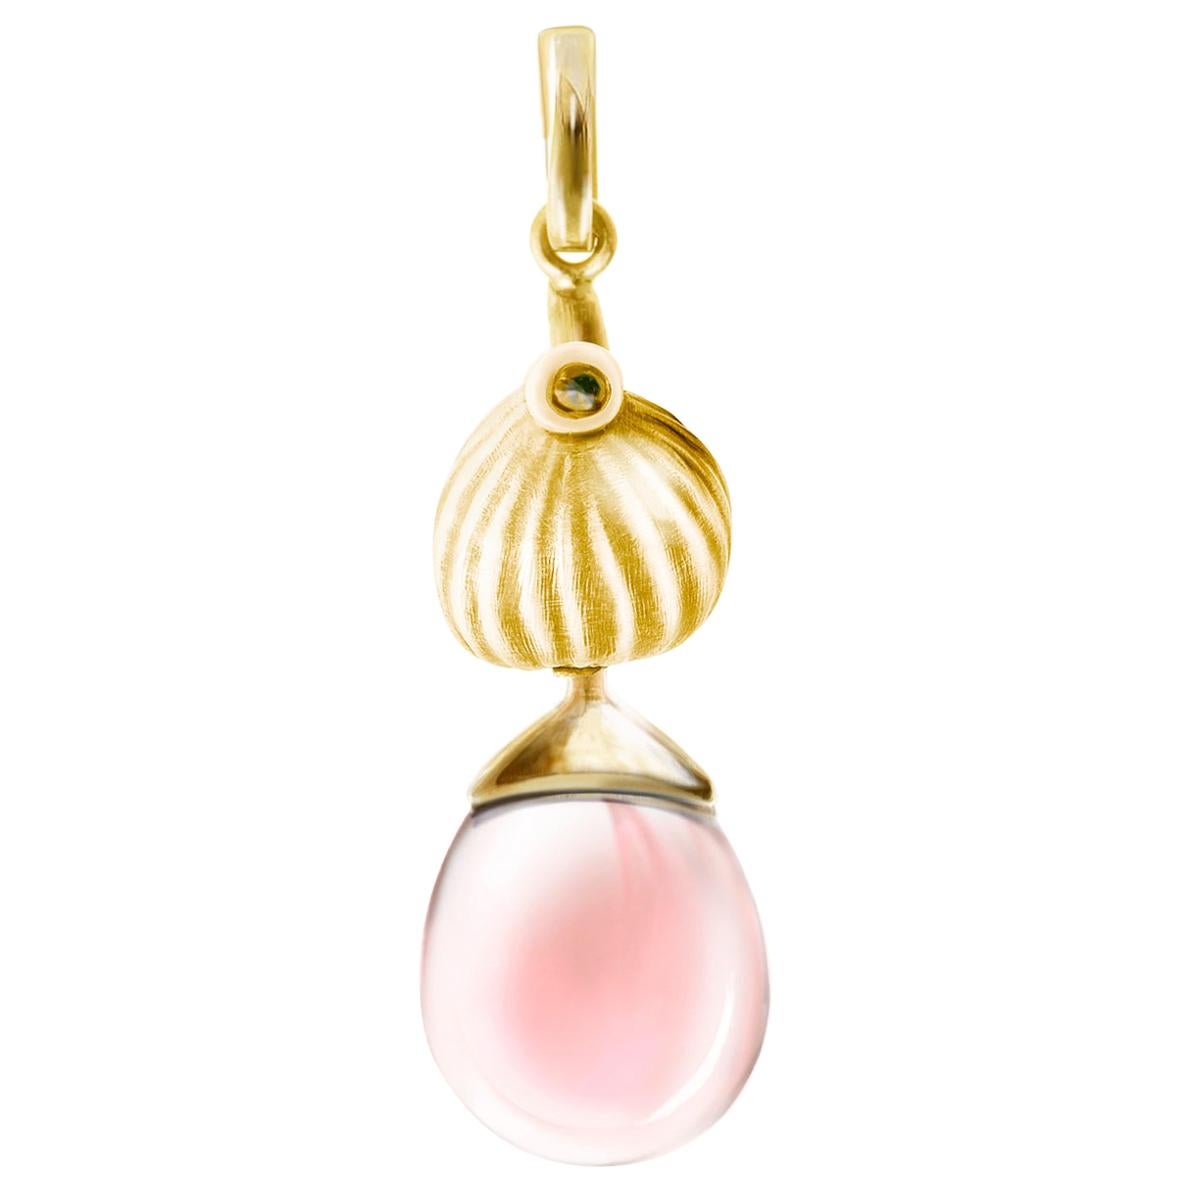 Yellow Gold Drop Pendant Necklace with Rose Quartz by the Artist For Sale